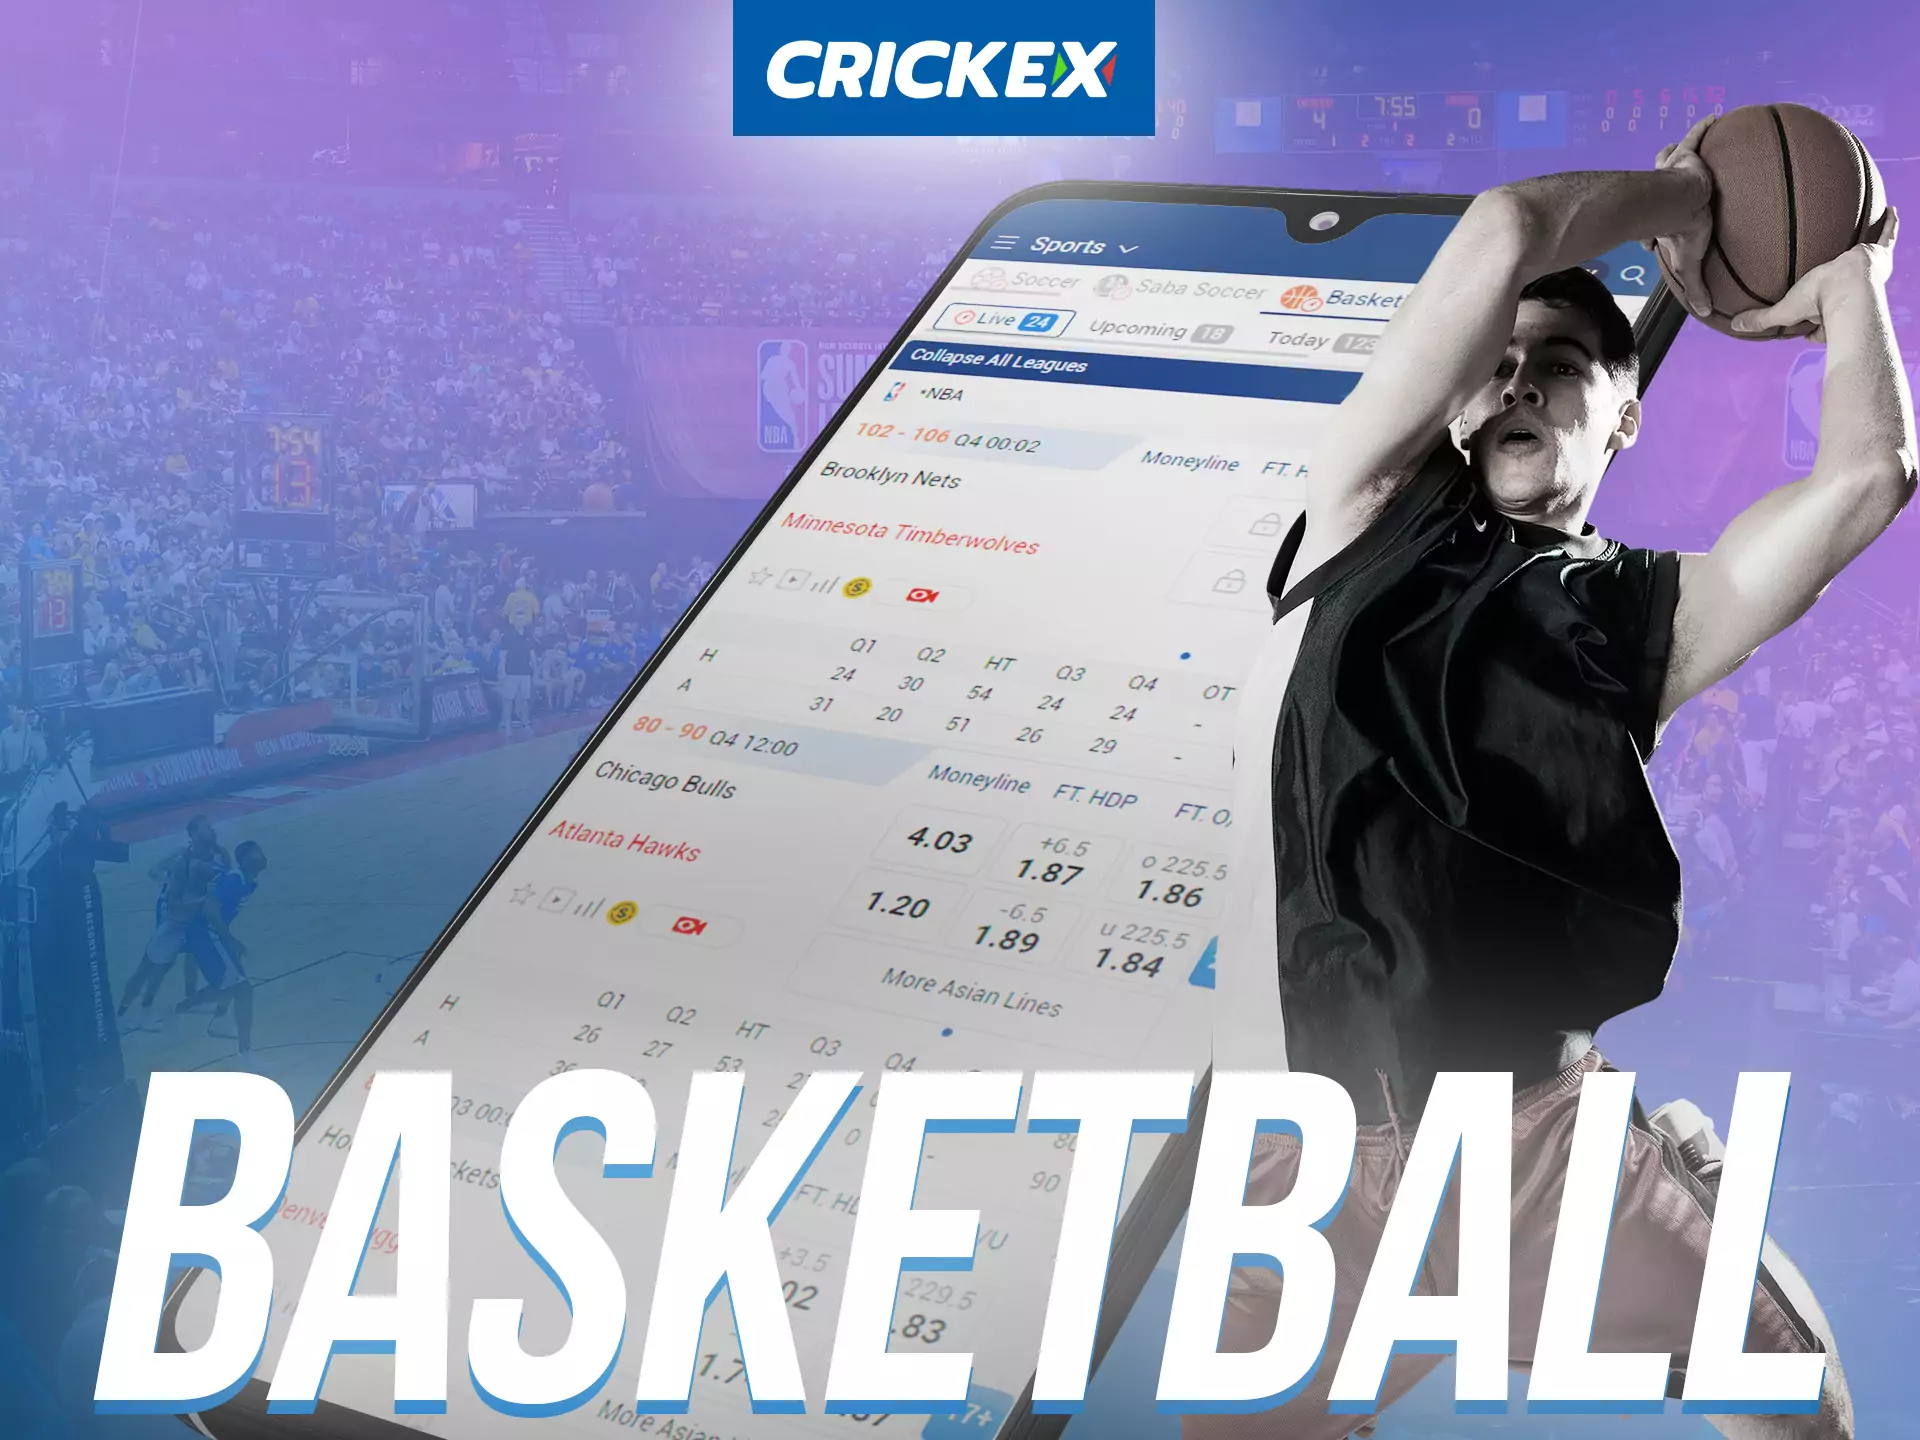 With the Crickex app you can bet on basketball.